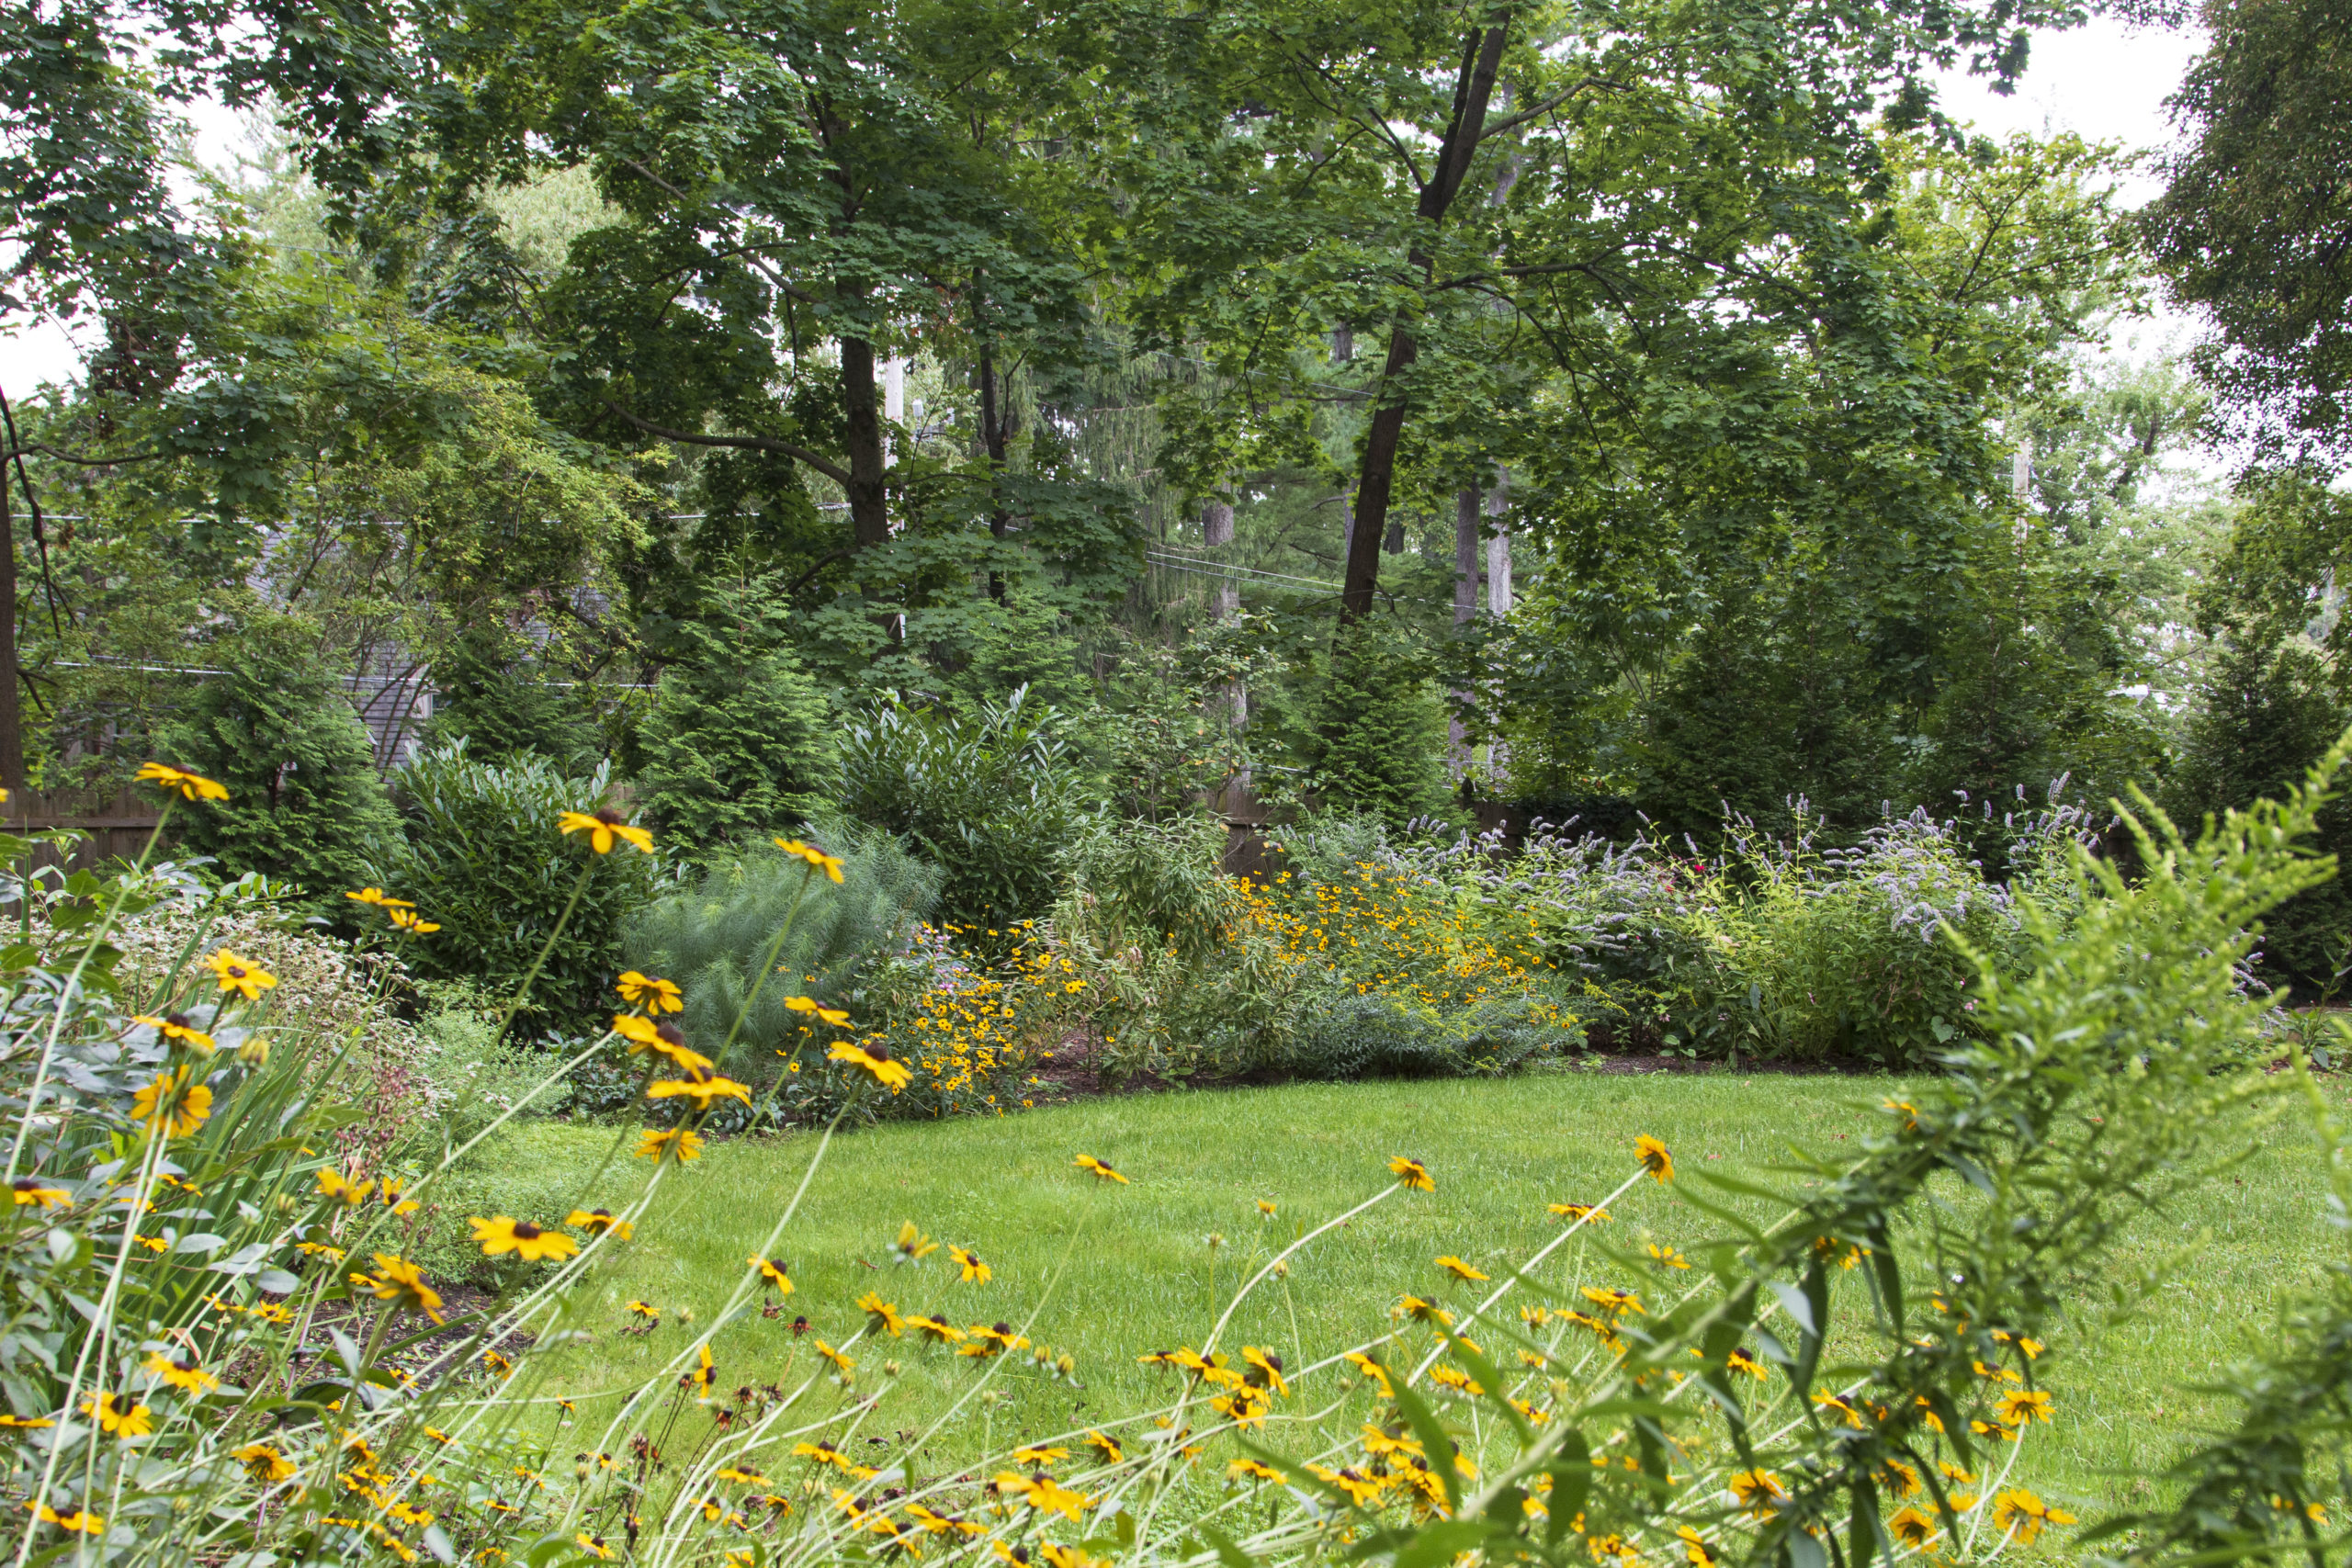 Colorful perennial beds encircle a formal lawn. Stately evergreens screen the street behind.